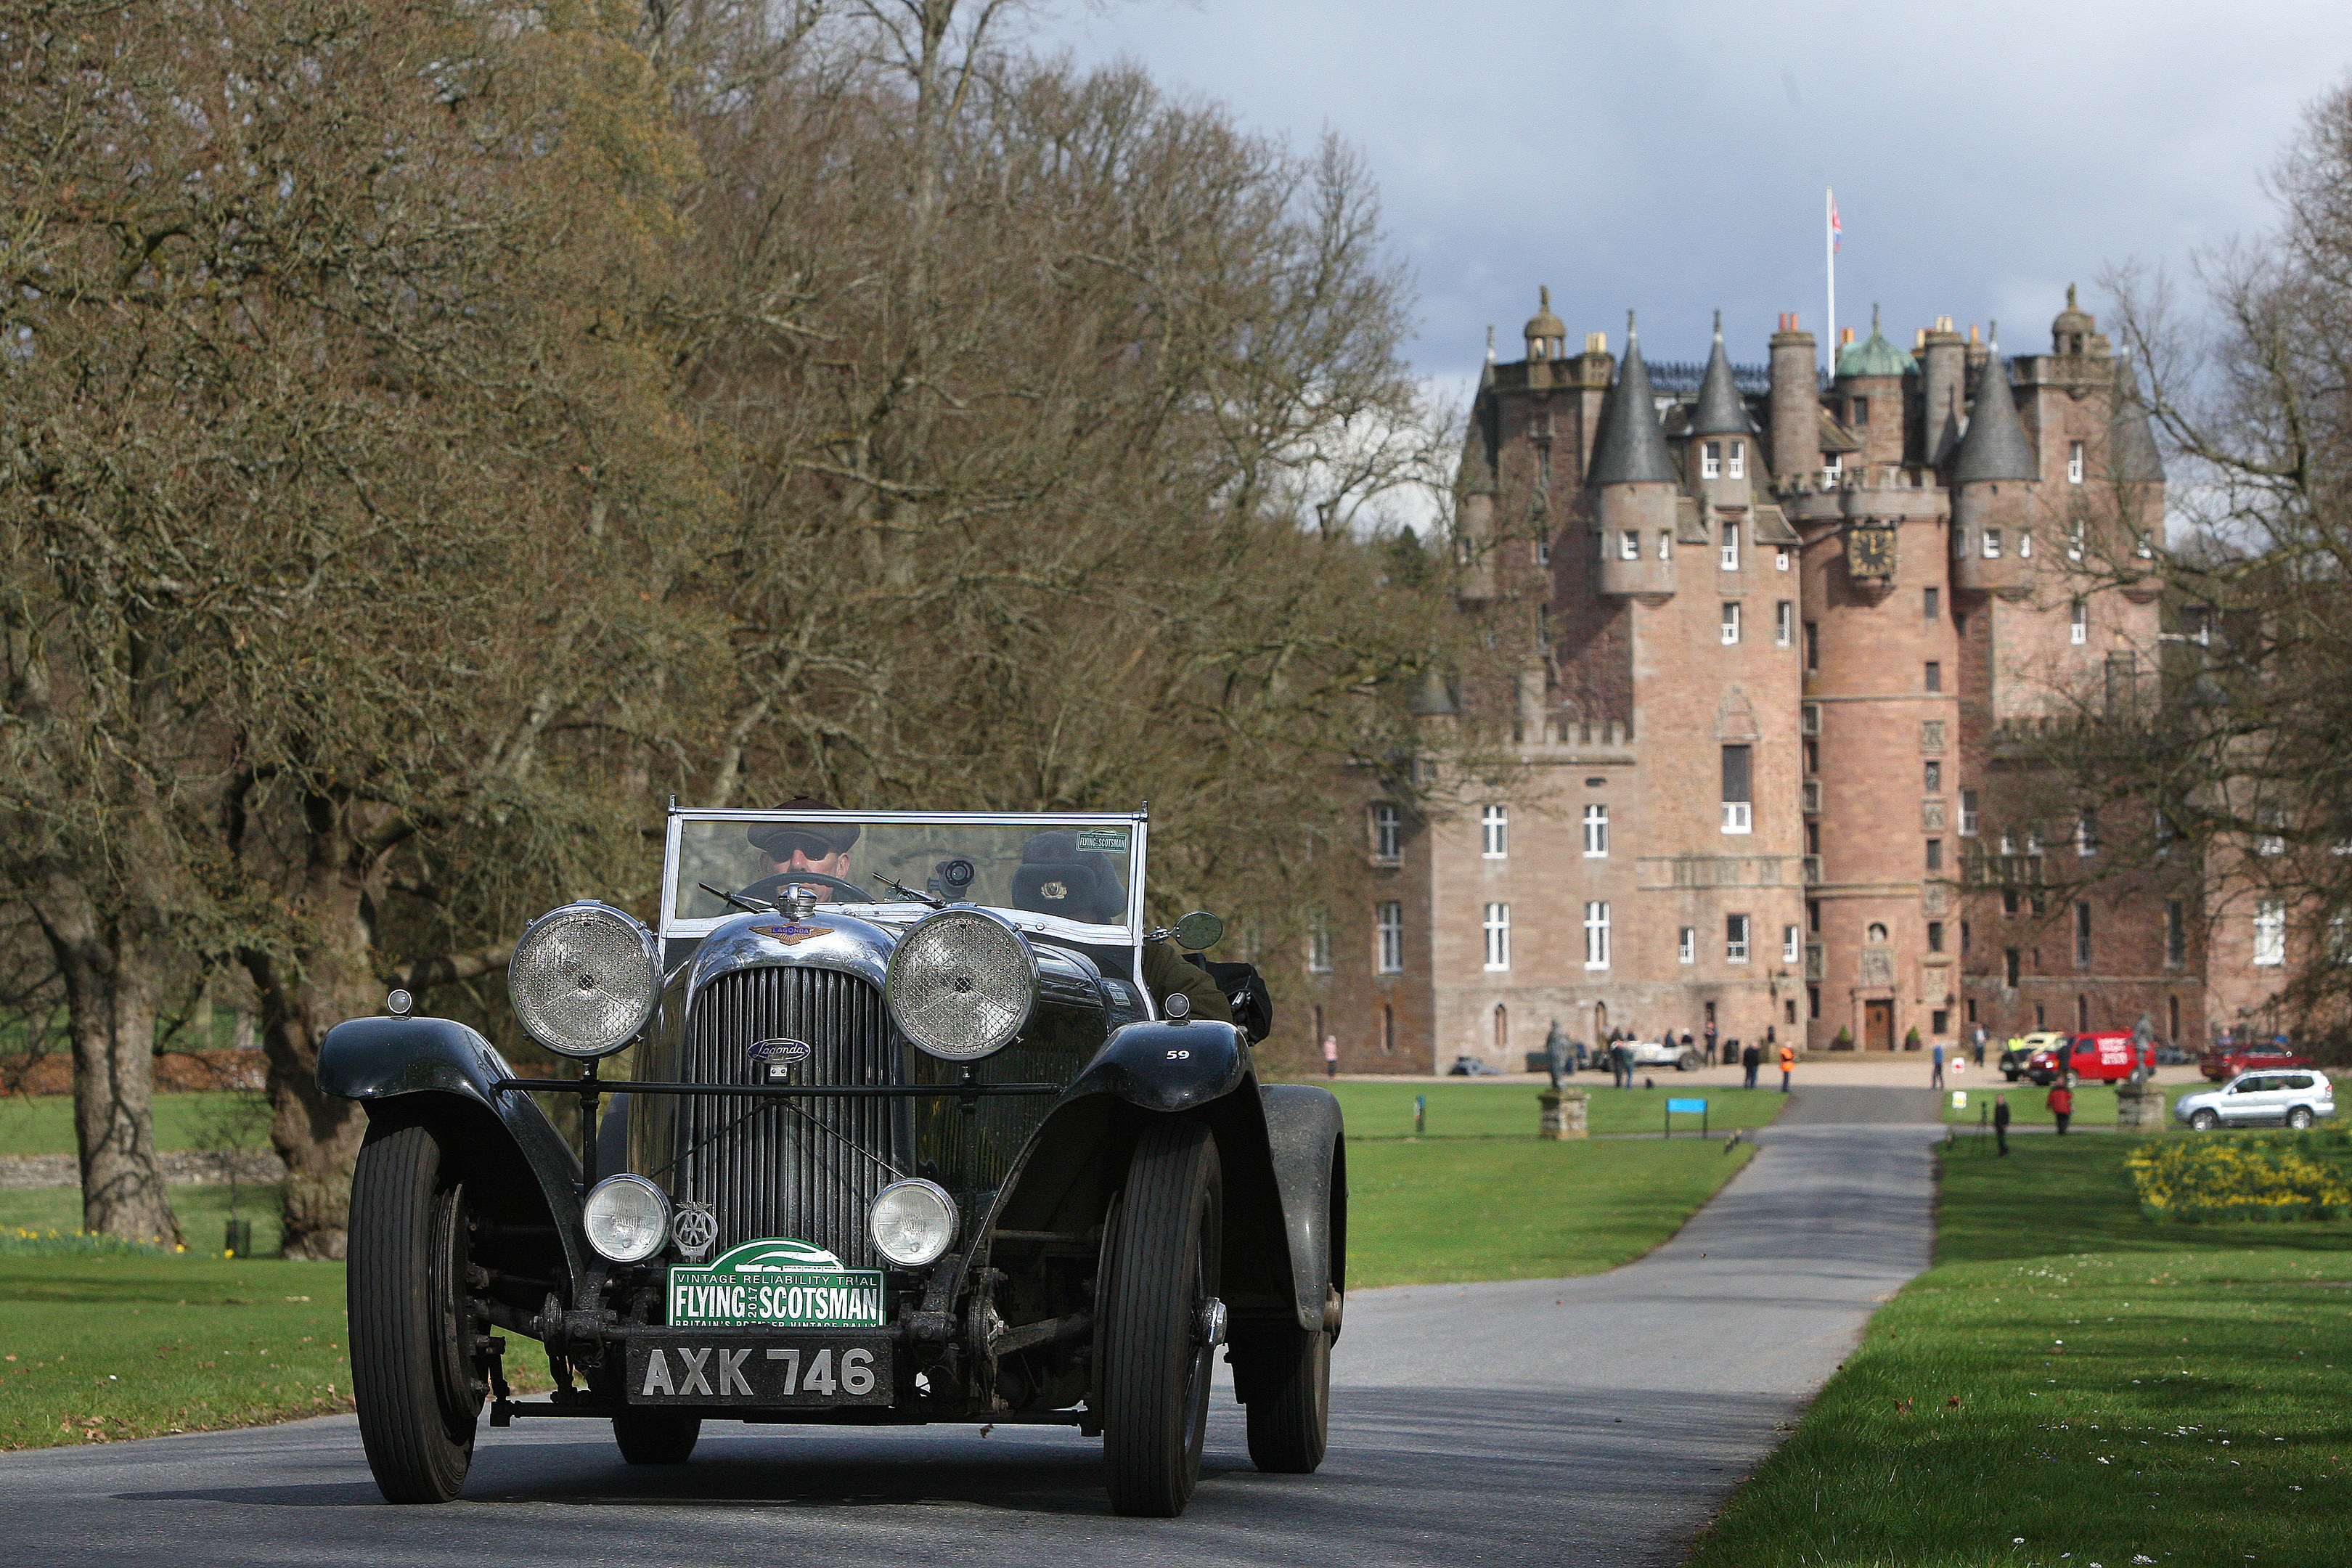 A classic car at Glamis Castle as part of the Flying Scotsman event